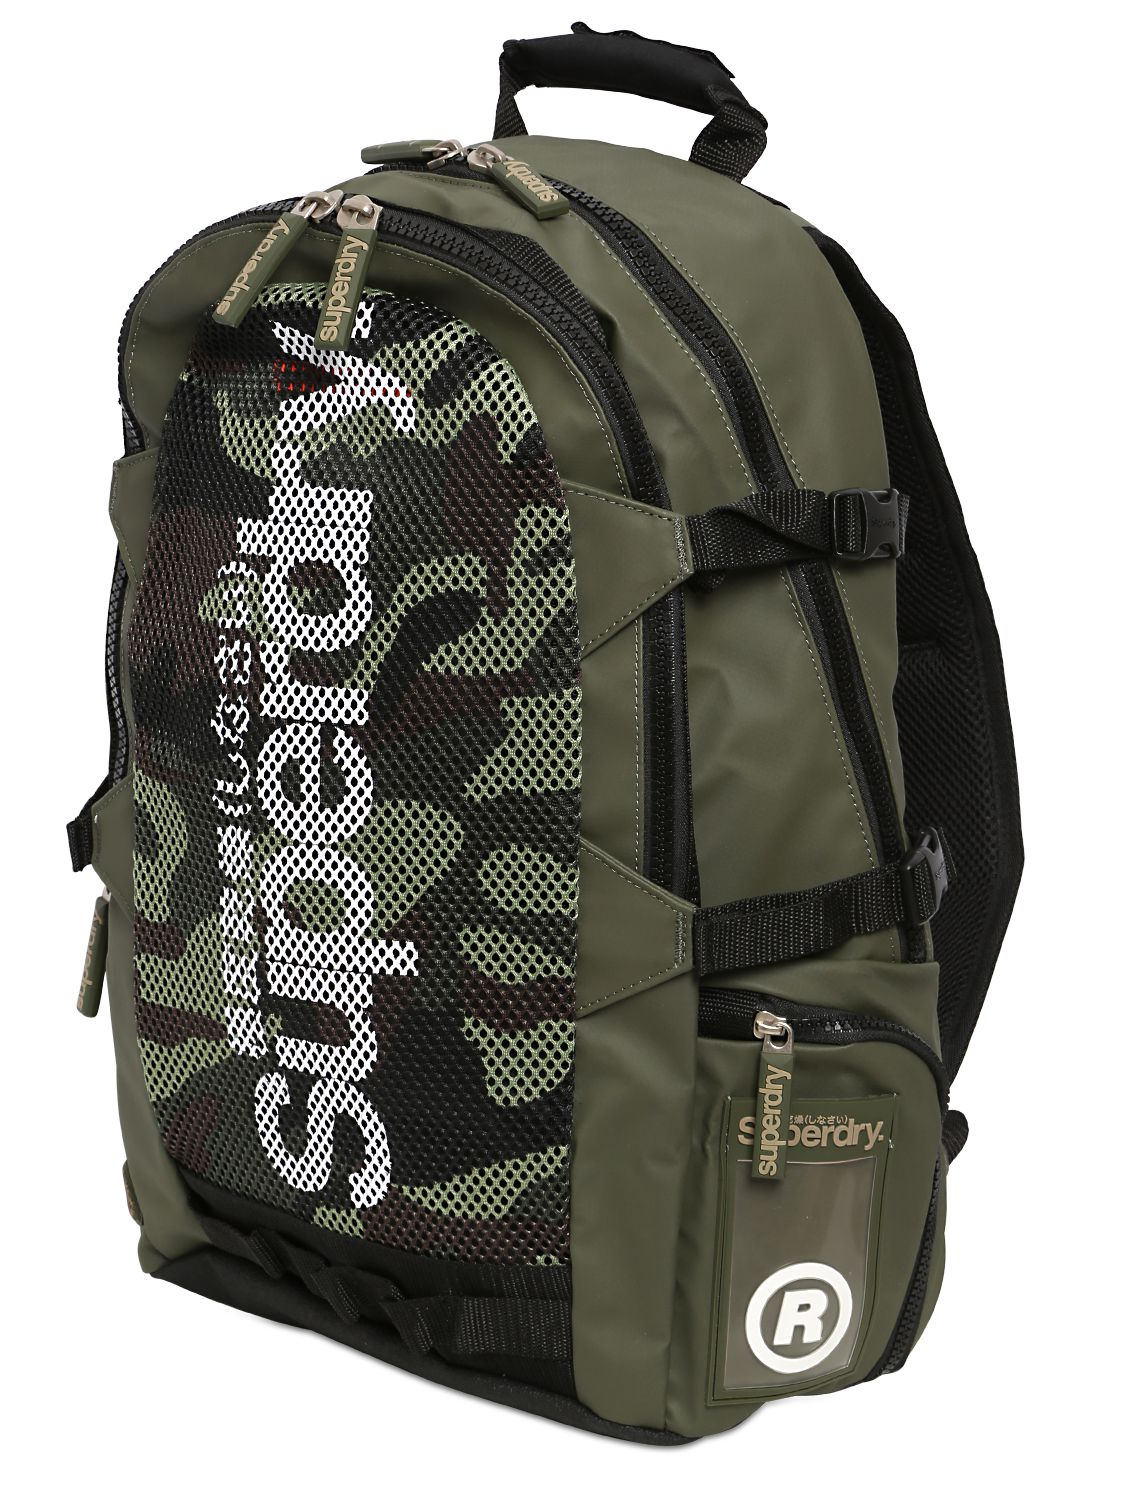 Superdry Camouflage Mesh Tarp Backpack in Army Green (Green) for Men - Lyst